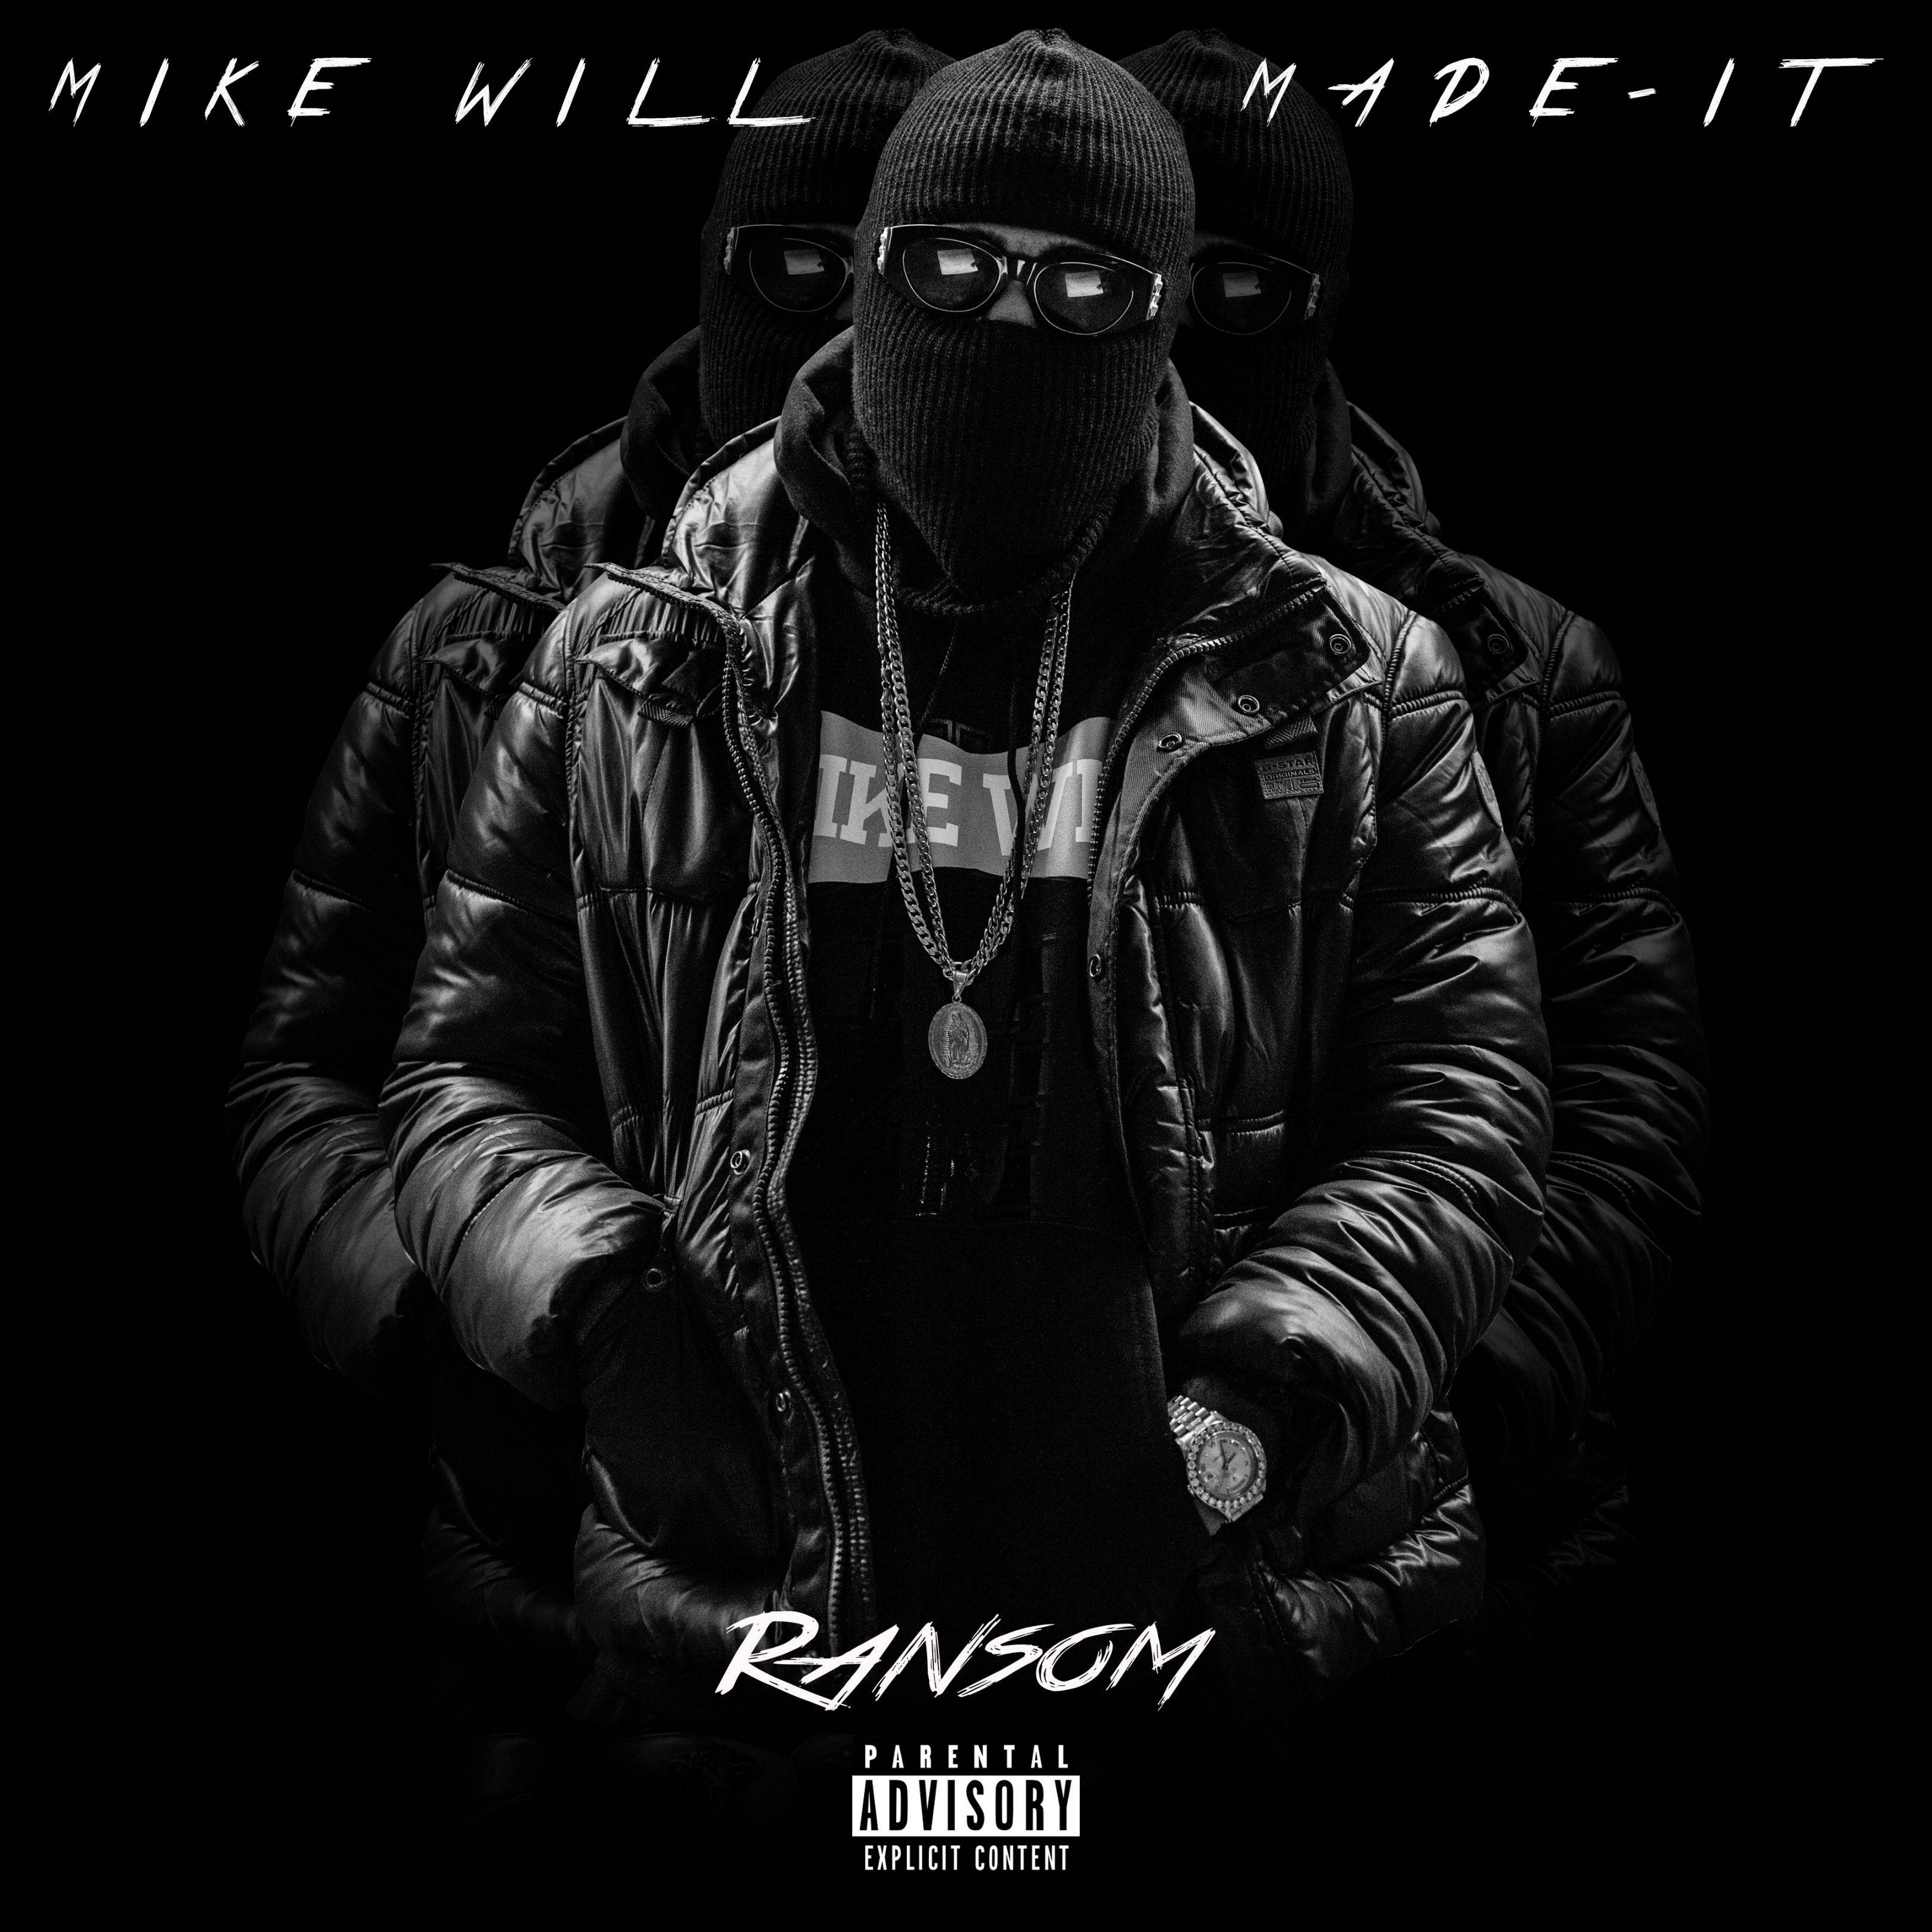 Mike_Will_Made_It_Ransom